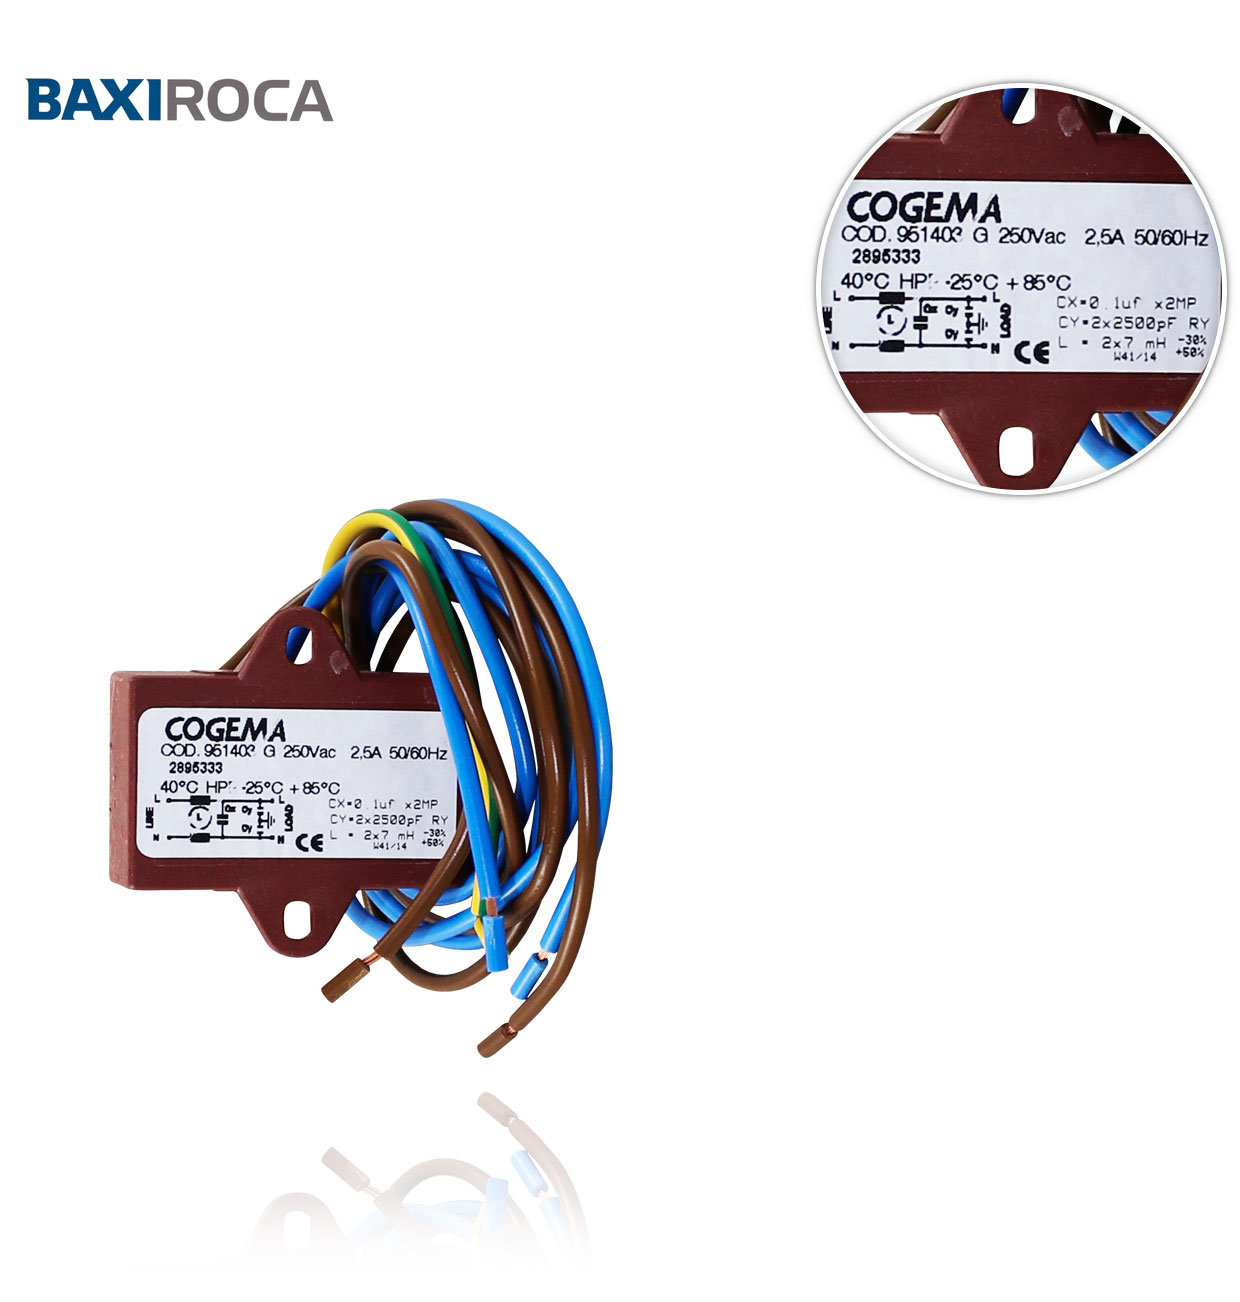 ROCA 121312155 INTERFERENCE FILTER